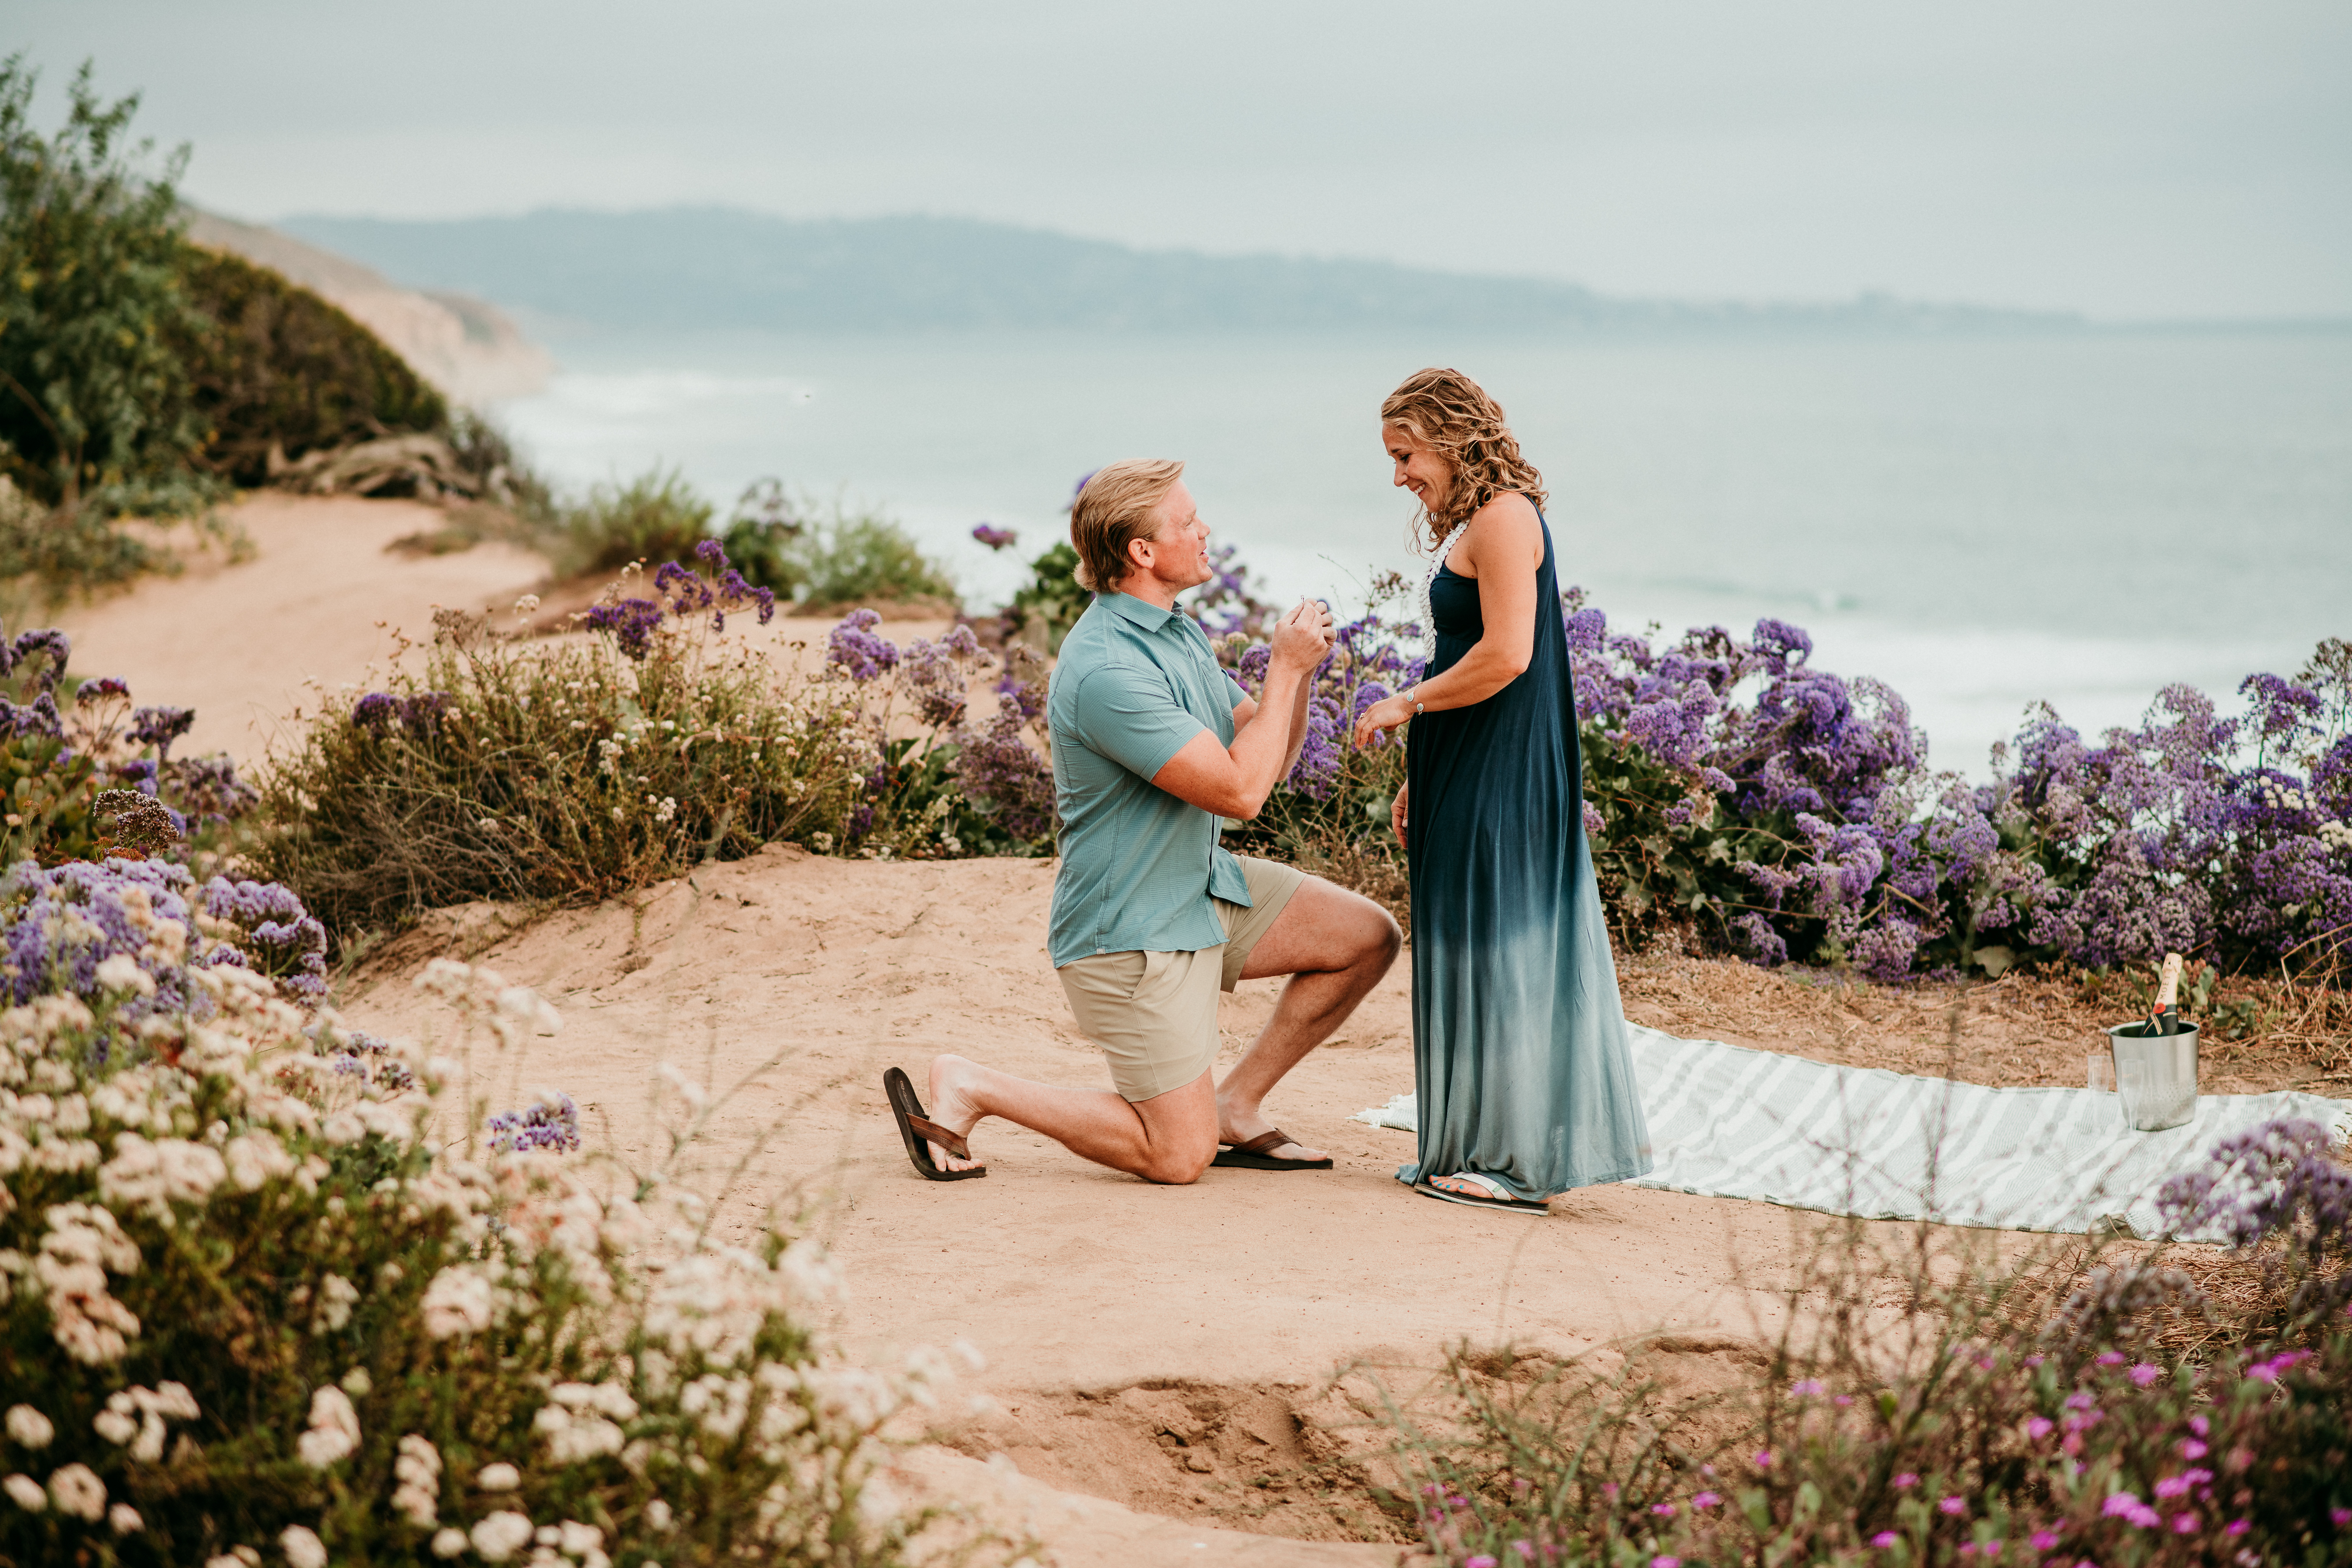 San Diego Proposal Photographer Marie Monforte captures Cliffside Beach proposal surrounded by wildflowers. 